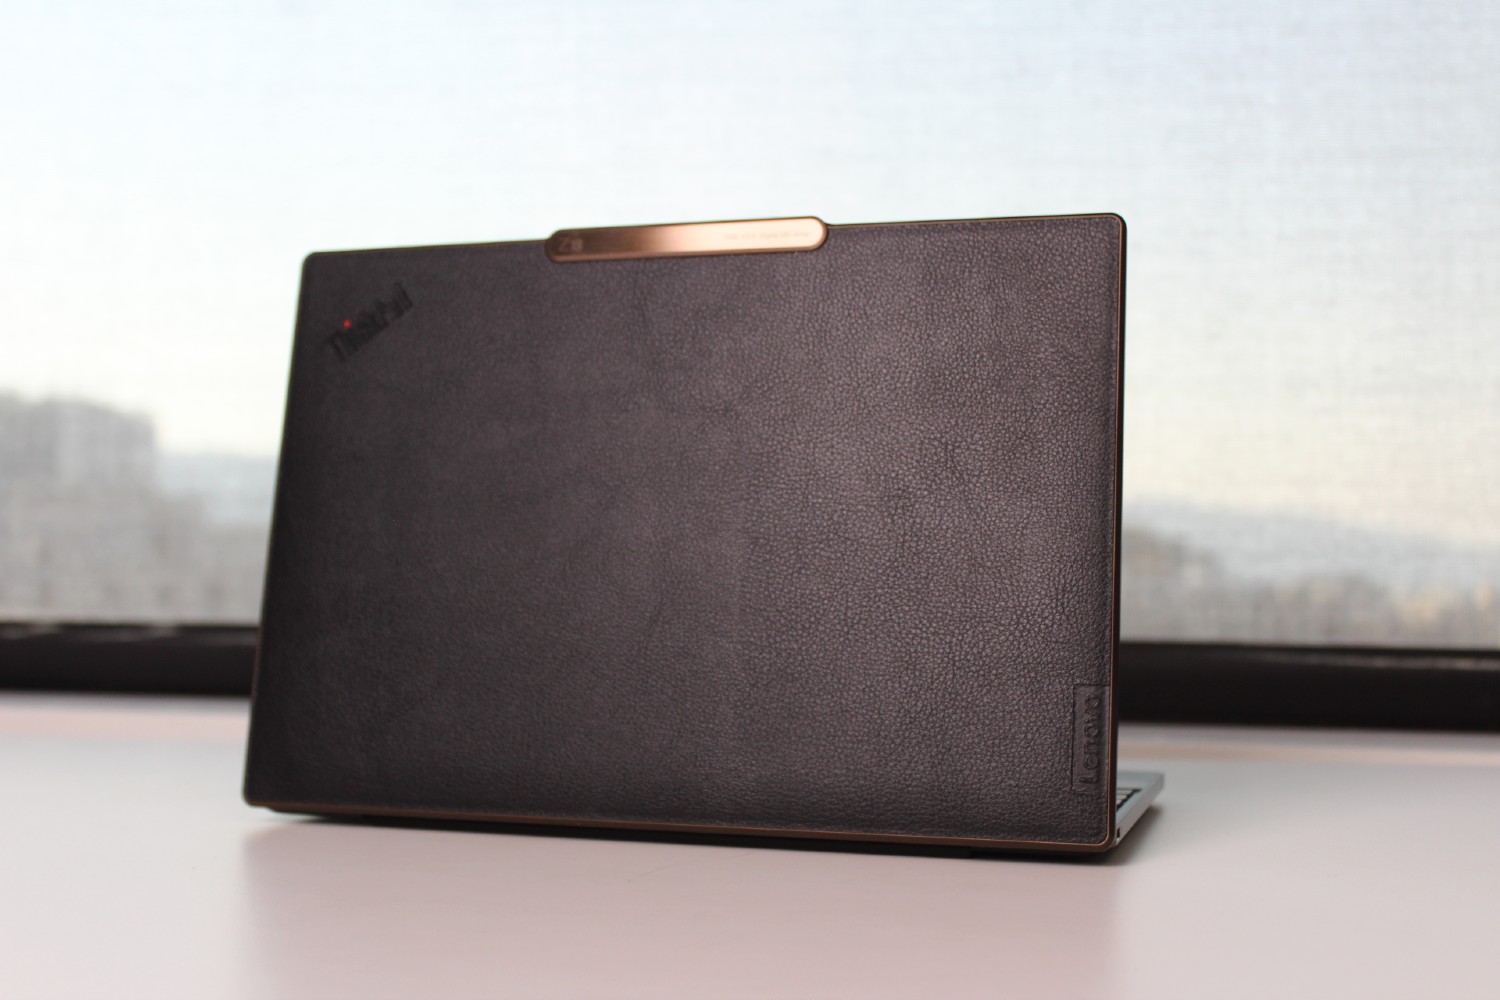 The faux-leather lid of the ThinkPad Z13.